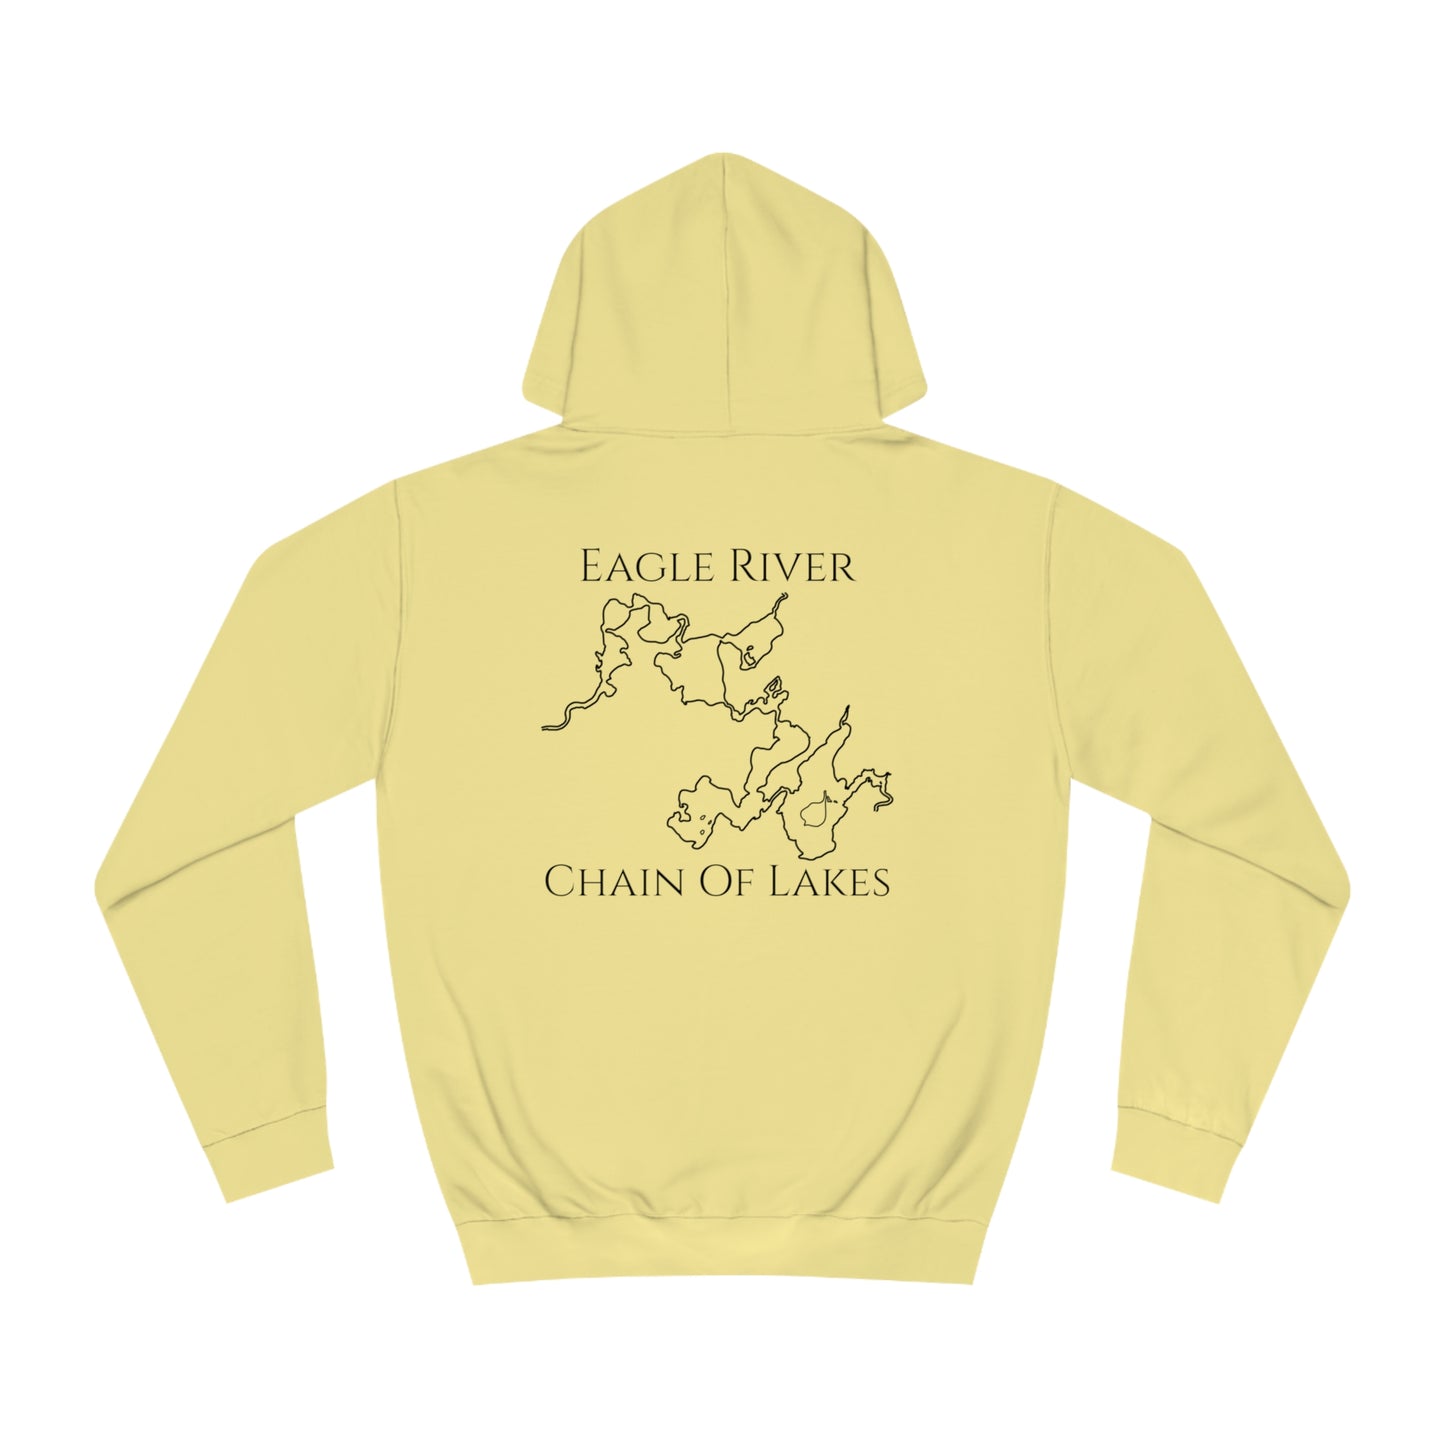 Eagle River Compass Rose Patch - Unisex Hoodie Medium Weight